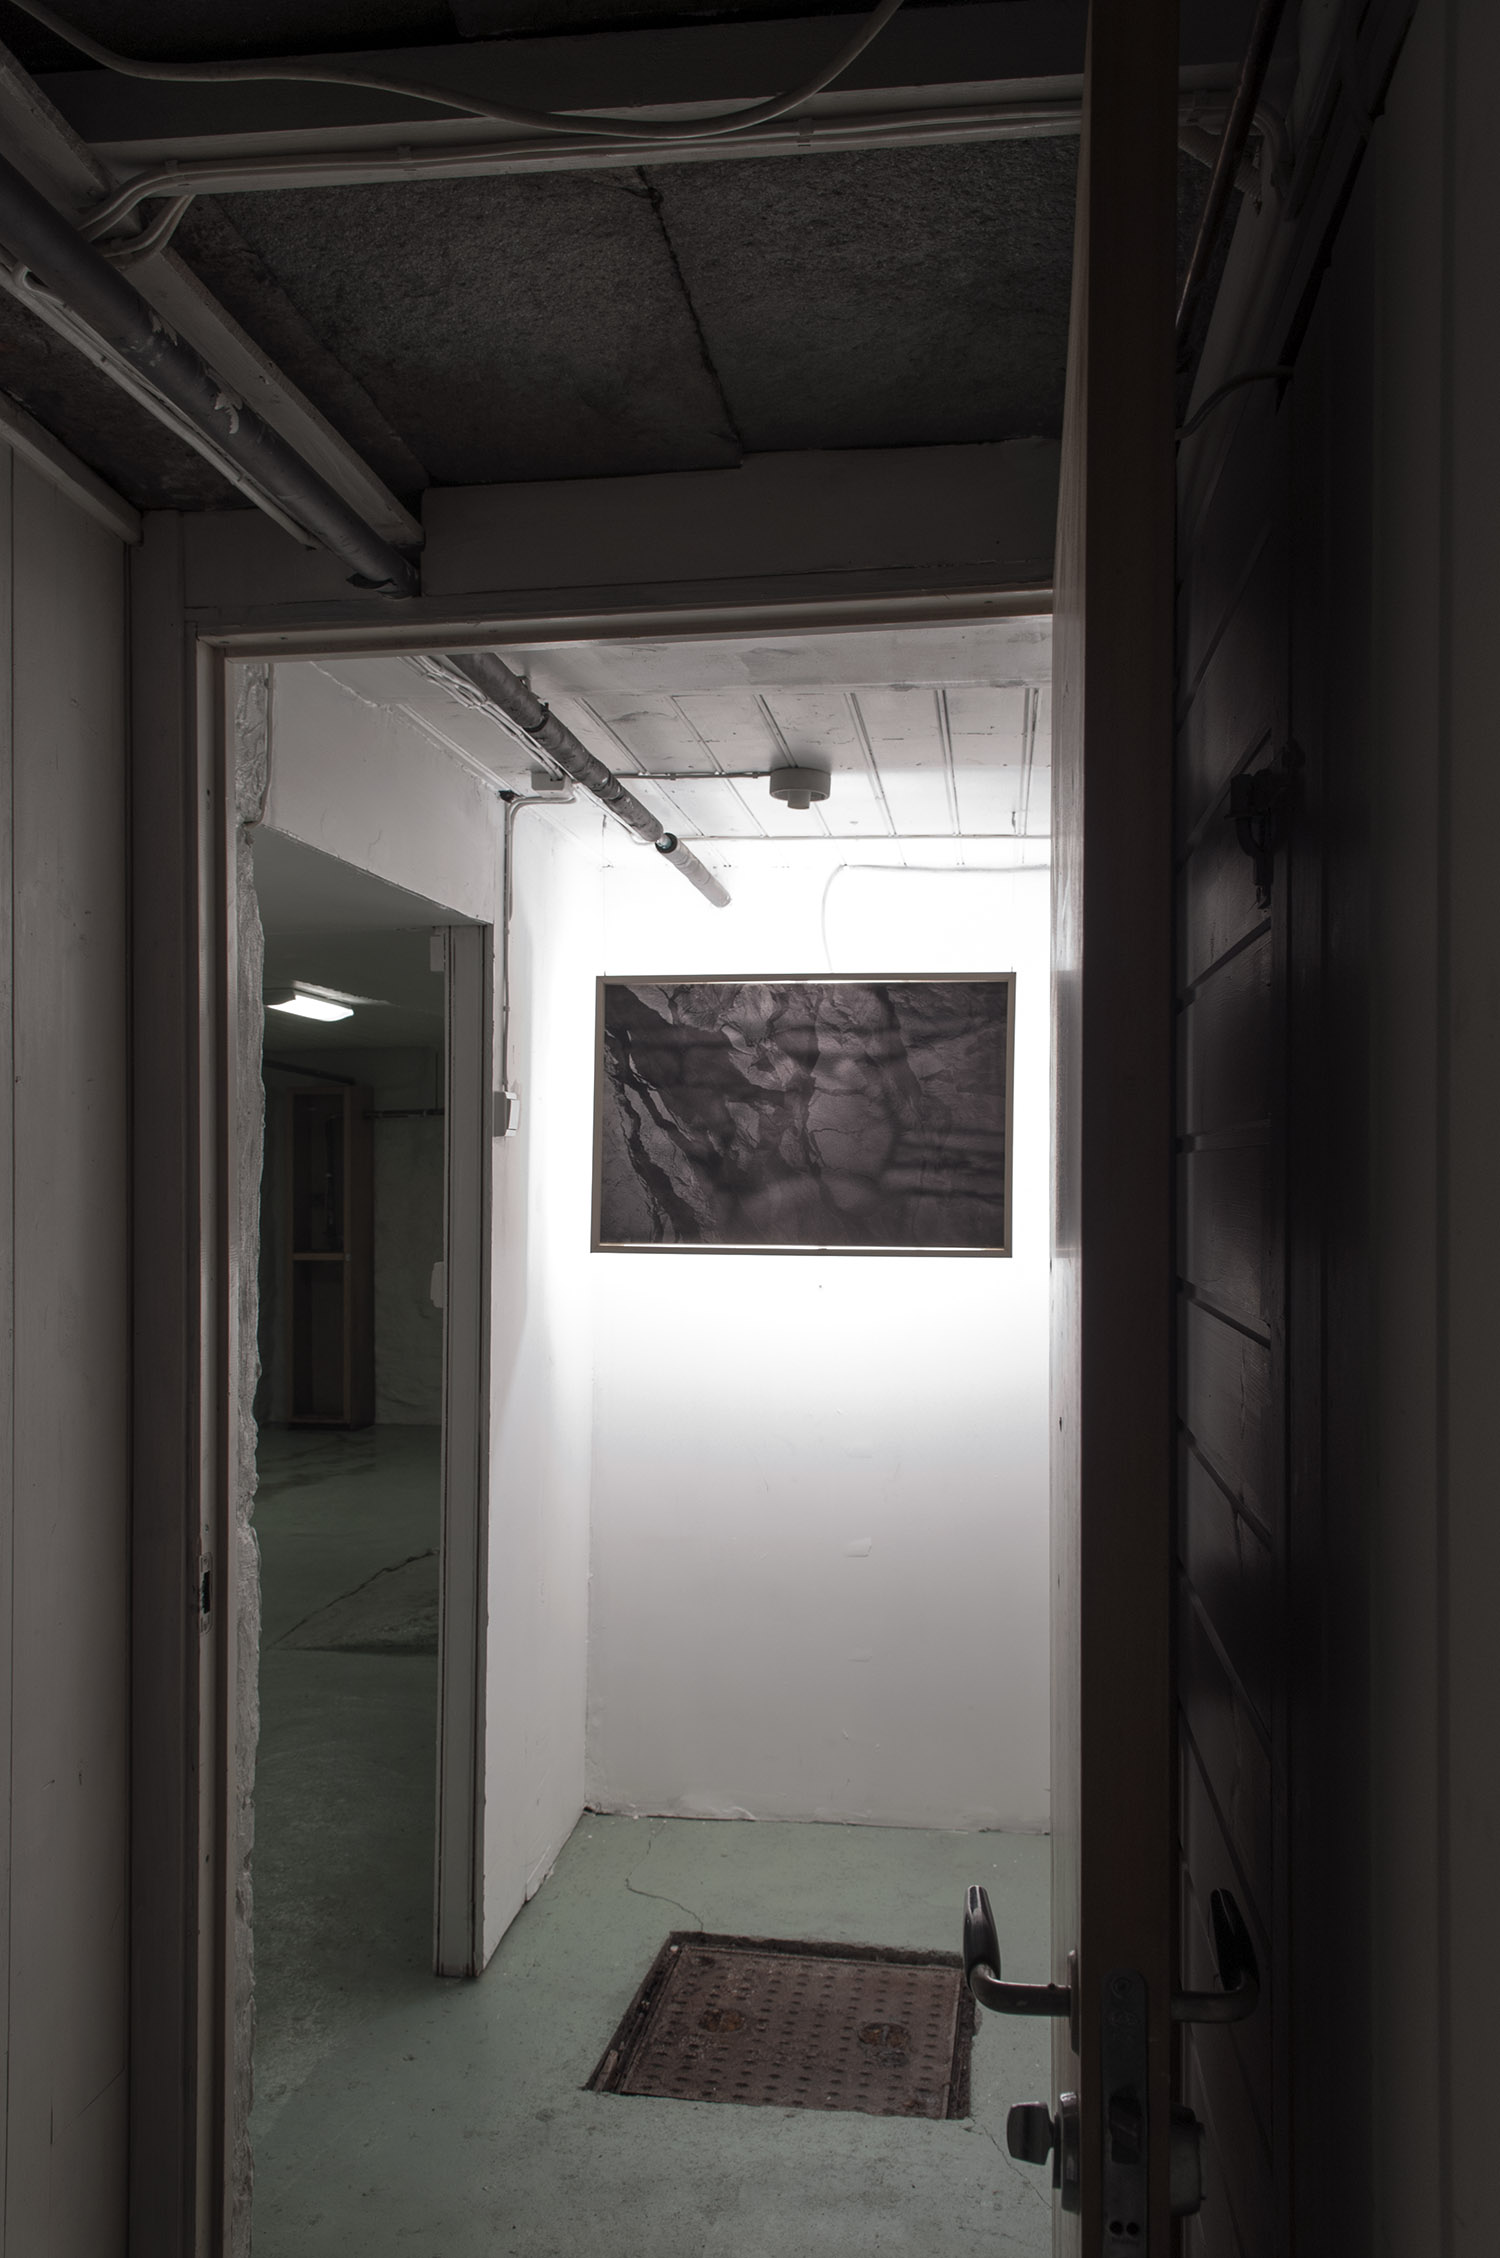  Light box installation , Behind These Walls Lies The Entire Earth,  group exhibition. Bergen (NO).  2014  